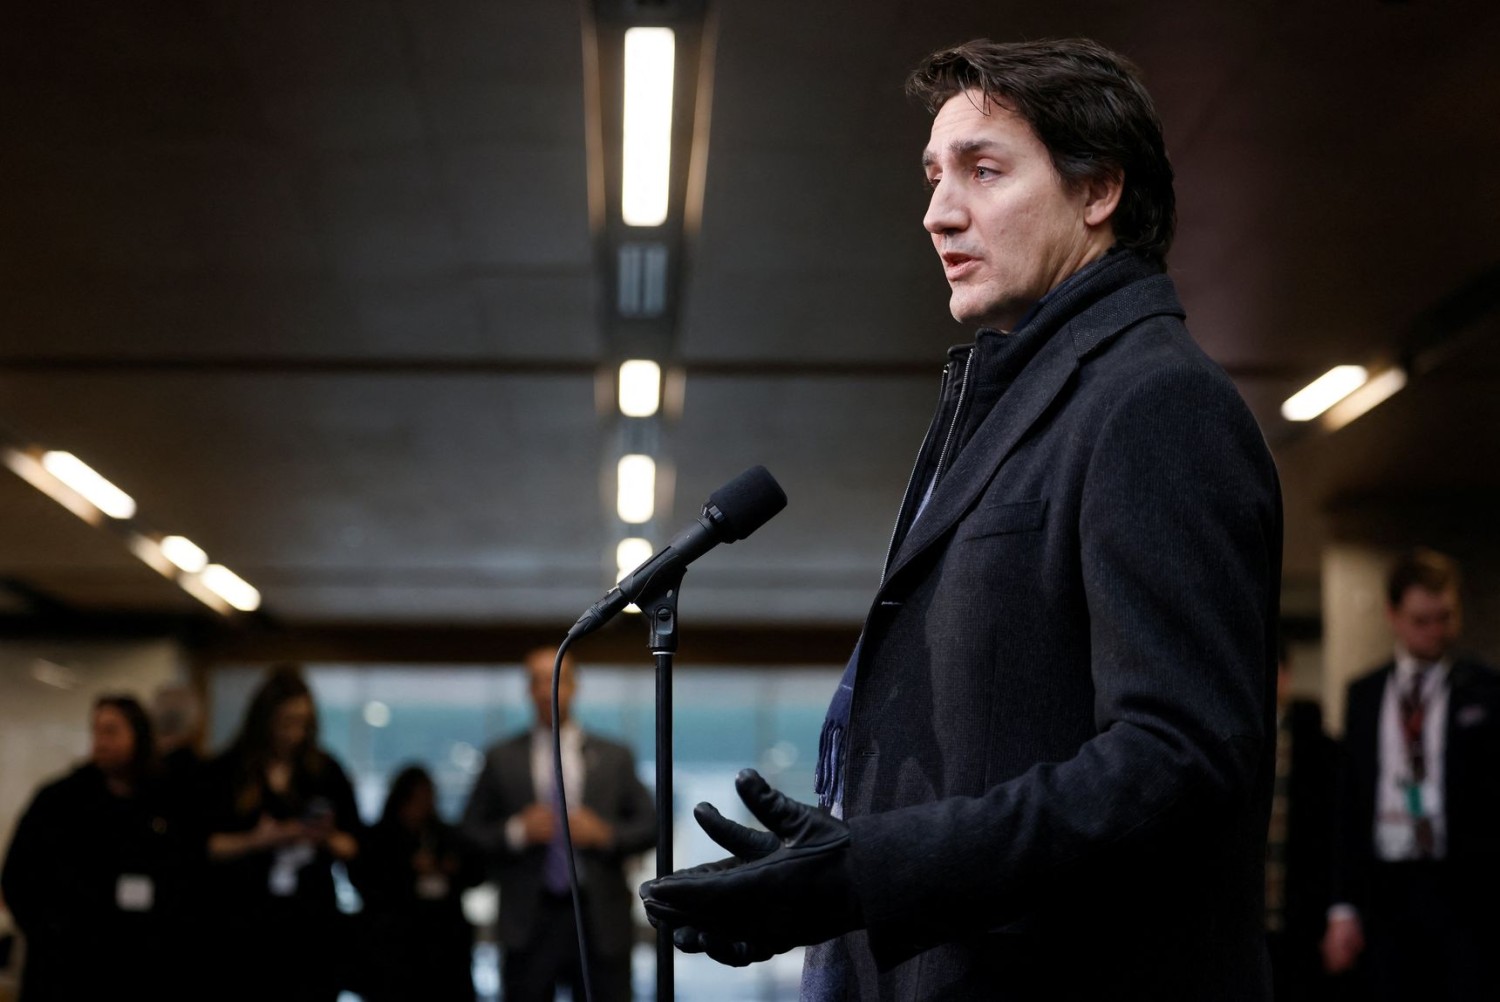 Canadian Prime Minister Justin Trudeau, shown in Ottawa earlier in the week, says the country’s forces would recover and analyze the wreckage of the downed object. PHOTO: BLAIR GABLE/REUTERS